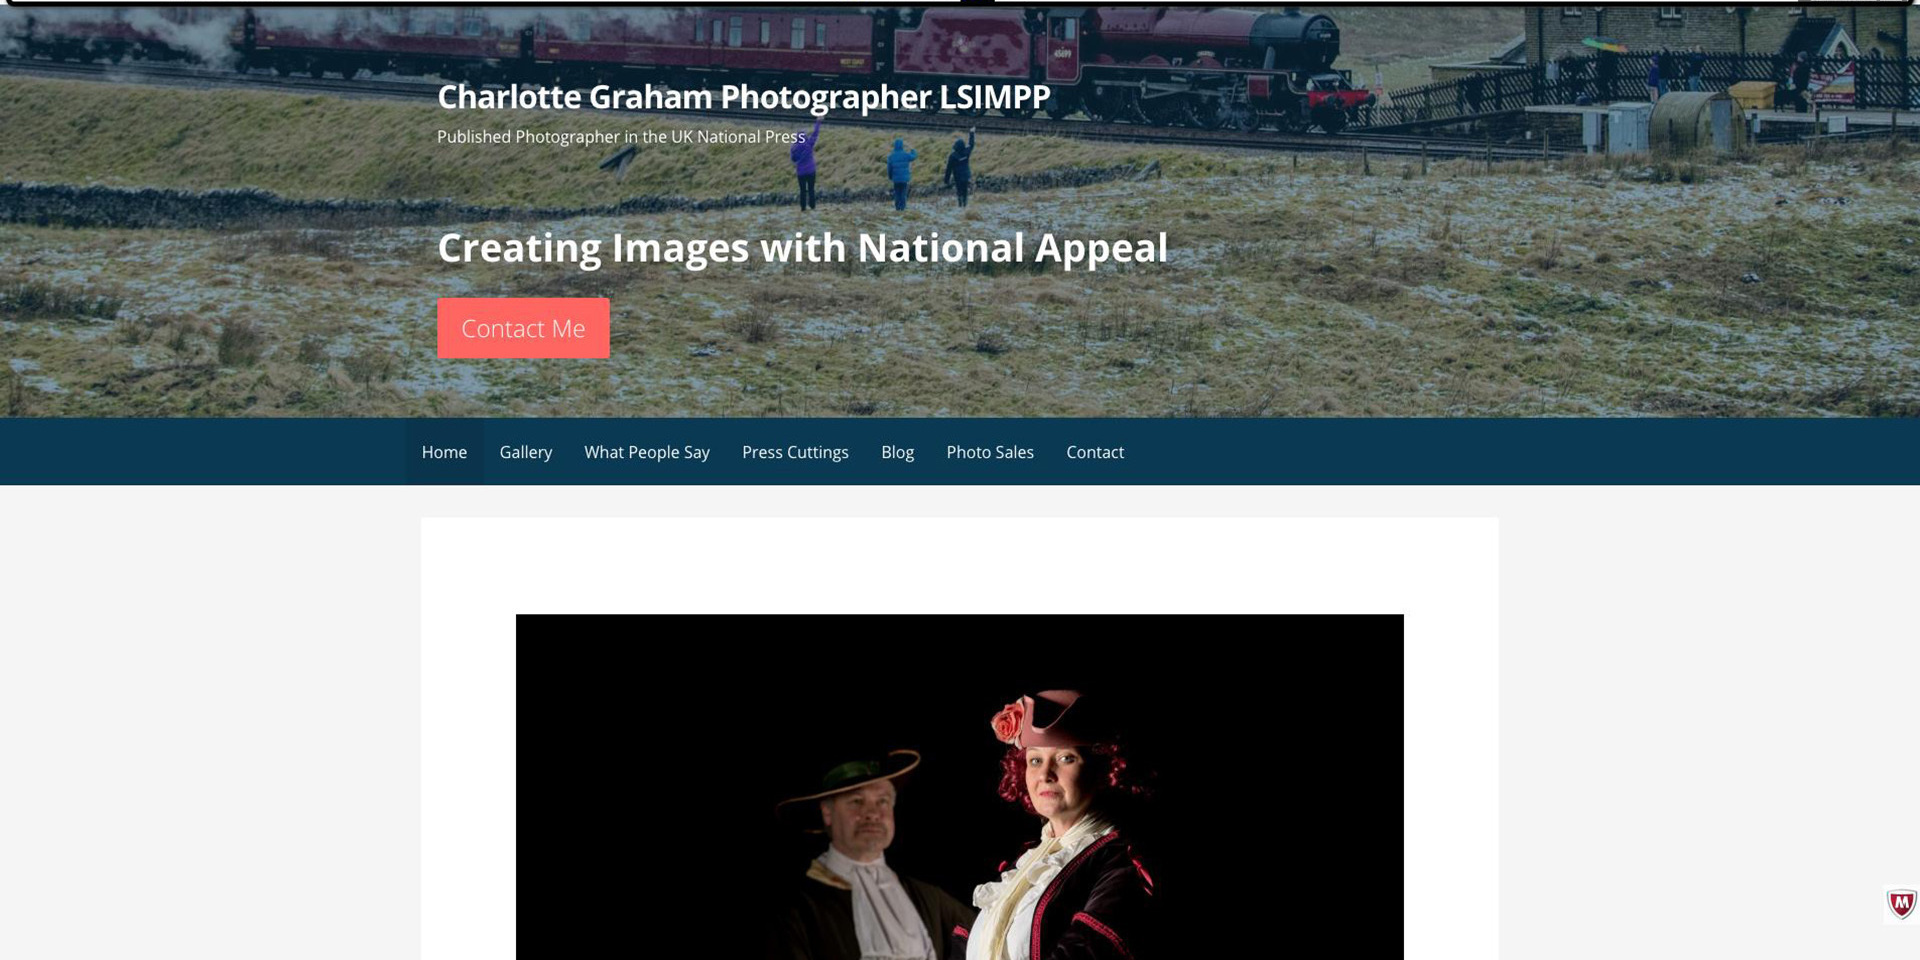 The previous Charlotte Graham Photography website, displayed on desktop